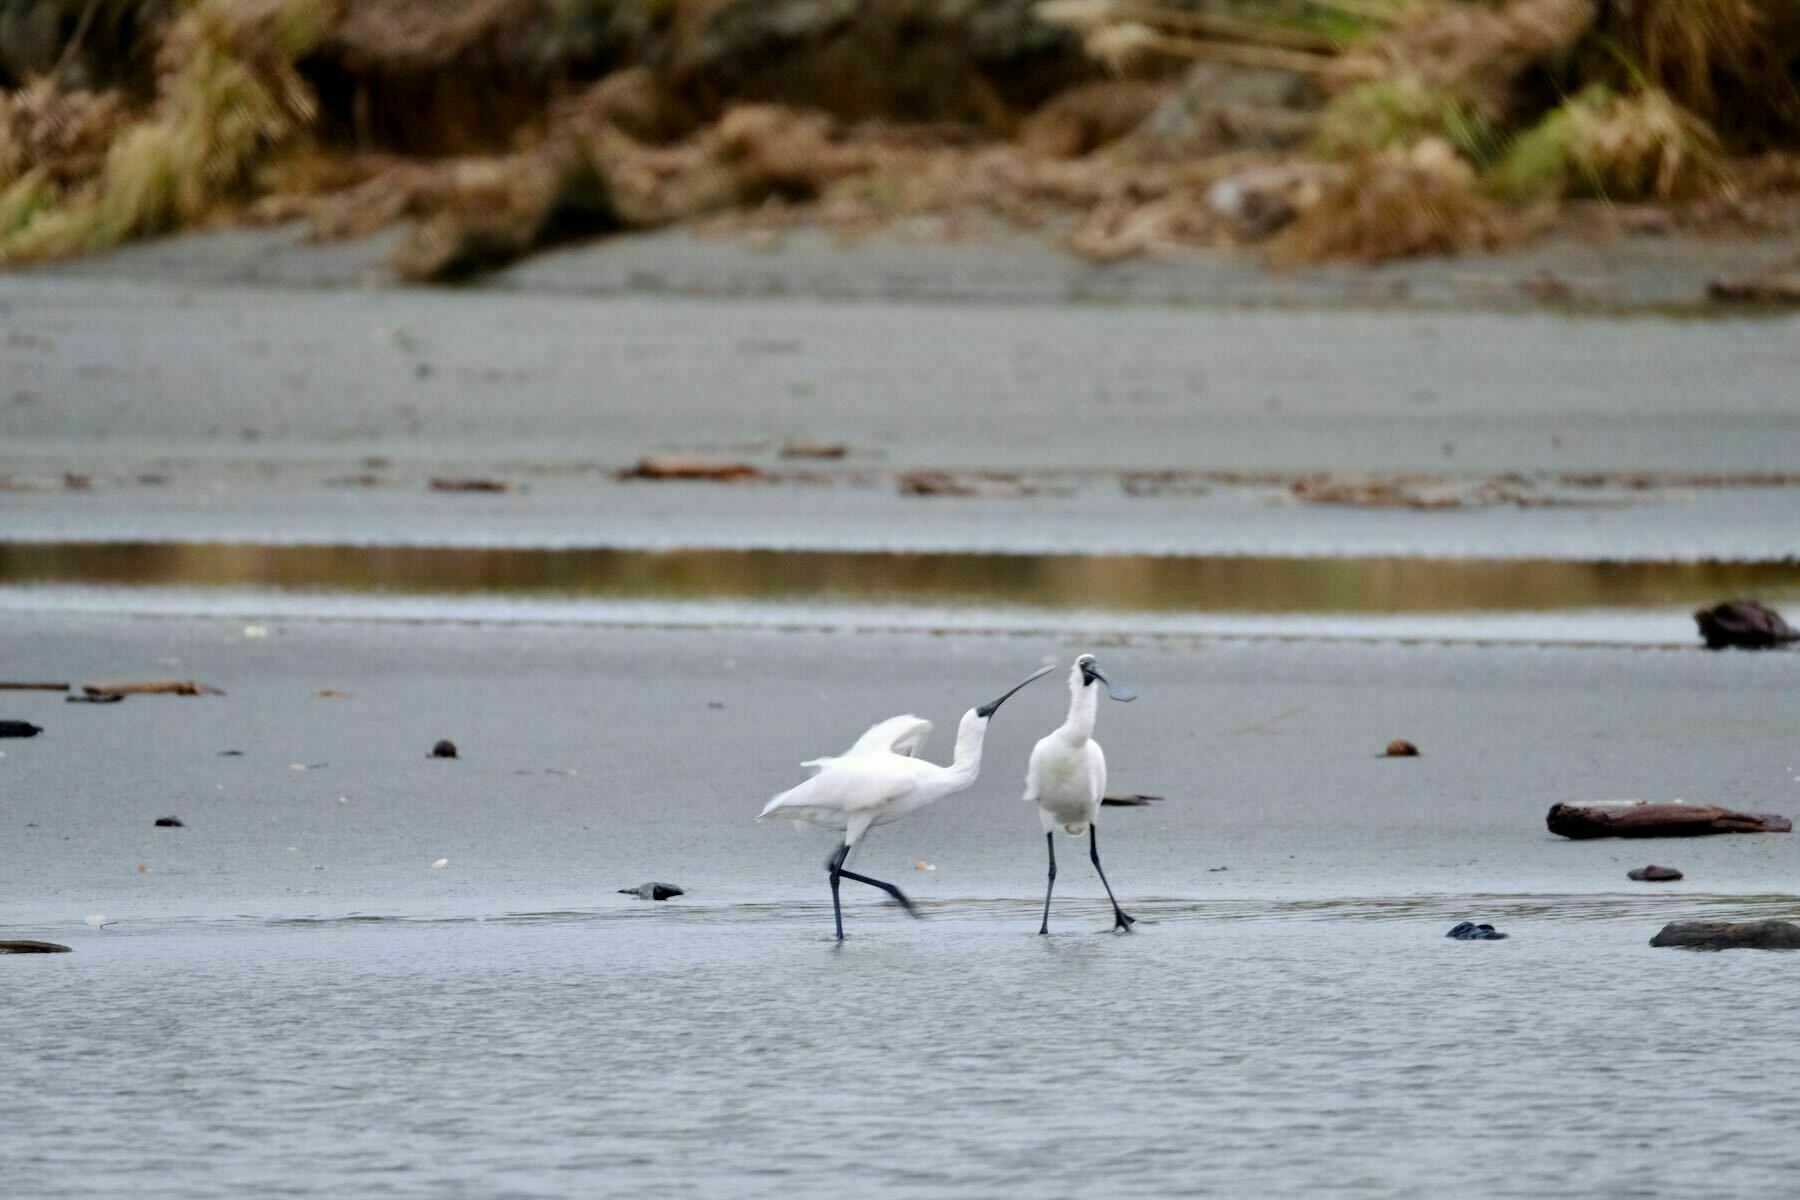 Two Spoonbills, in shallow water. A juvenile flaps its wings towards an adult, while pointing its beak at the adult's head. 